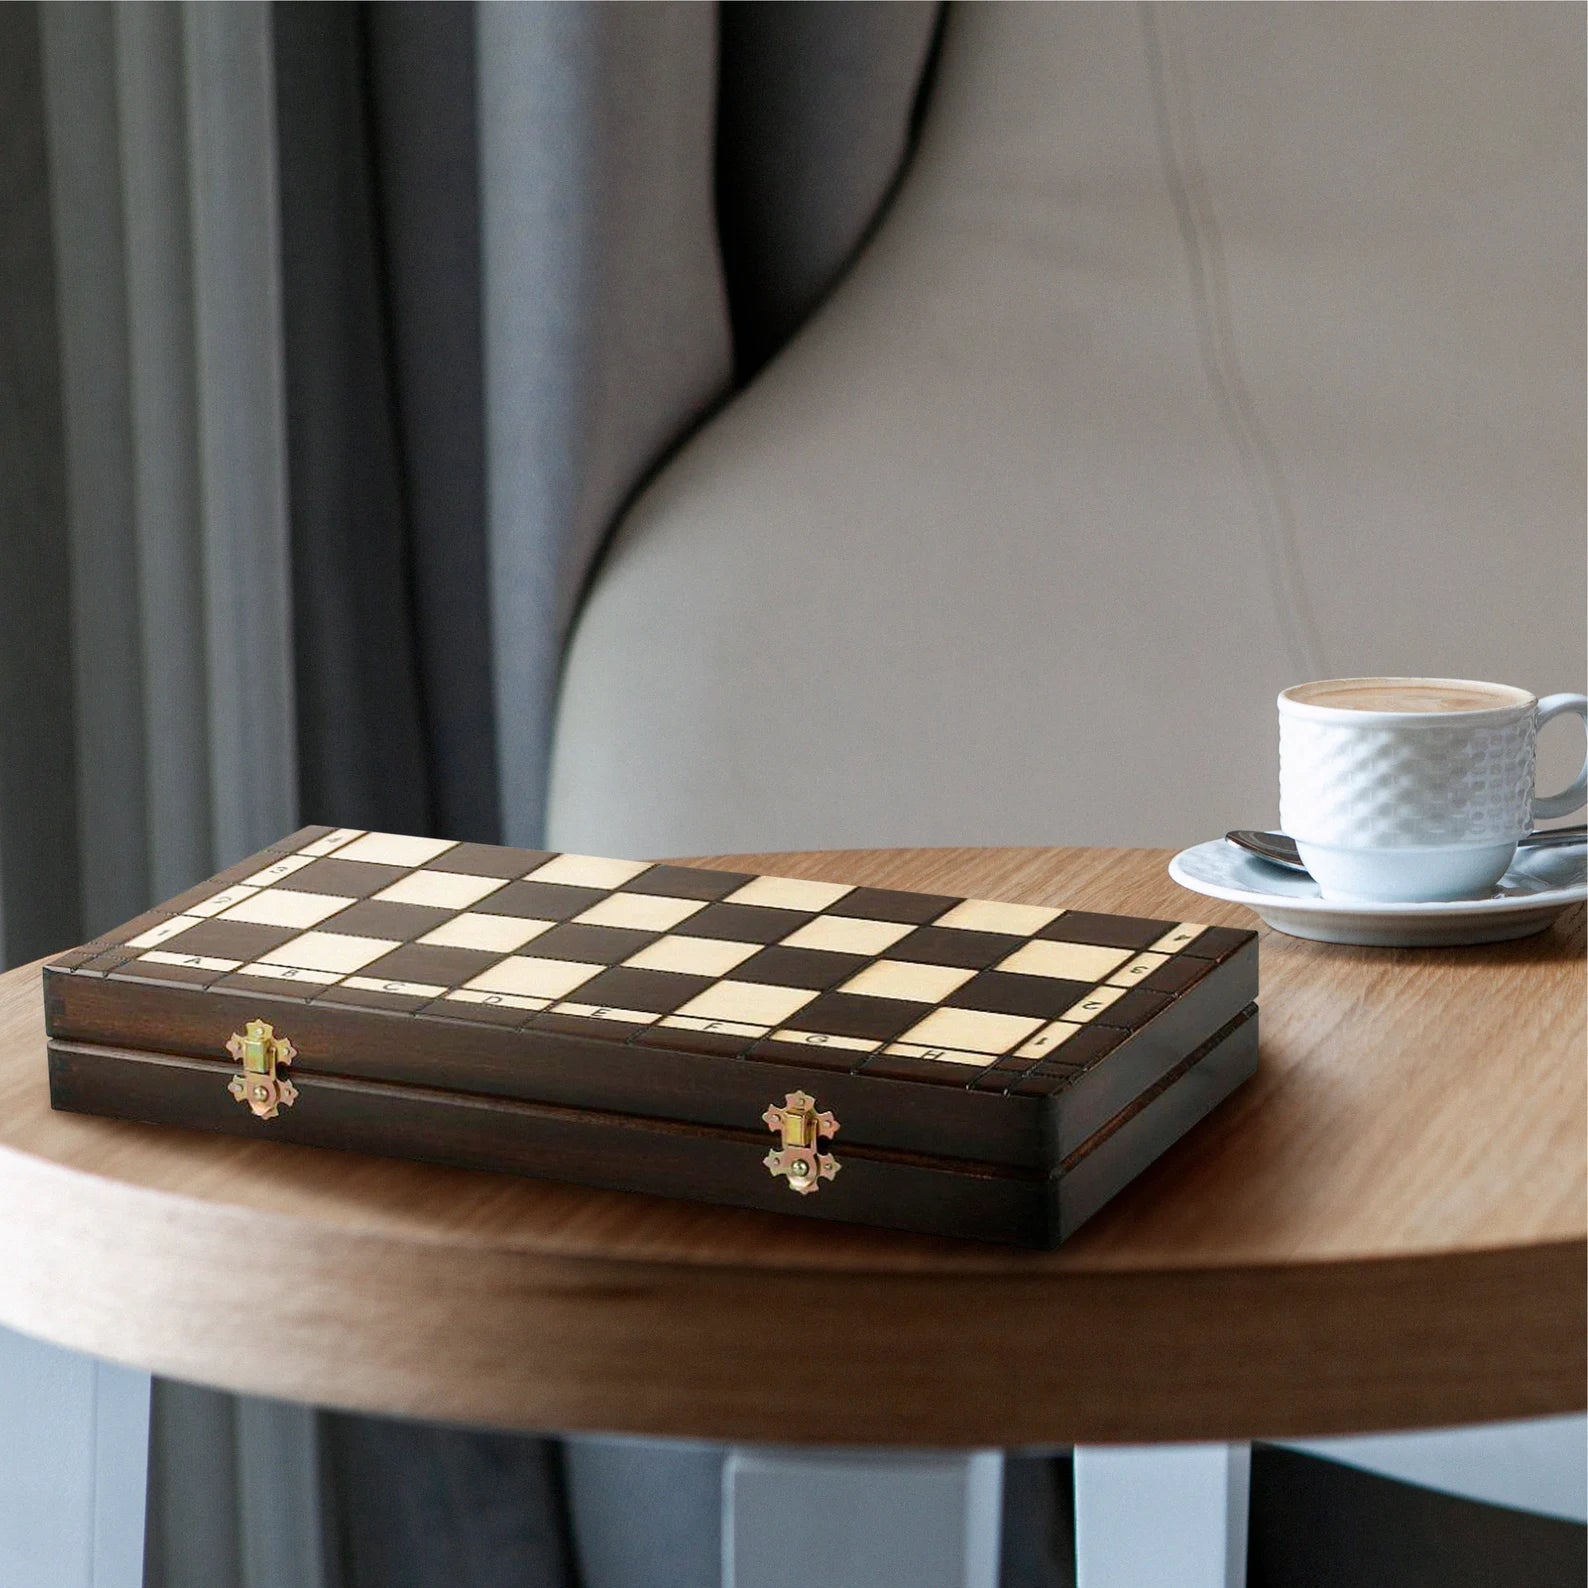 Chess Set - Beautiful Large Wooden Chess Sets - Wood Board 16 inch, Folding Storage Box Pieces - Fathers day gift